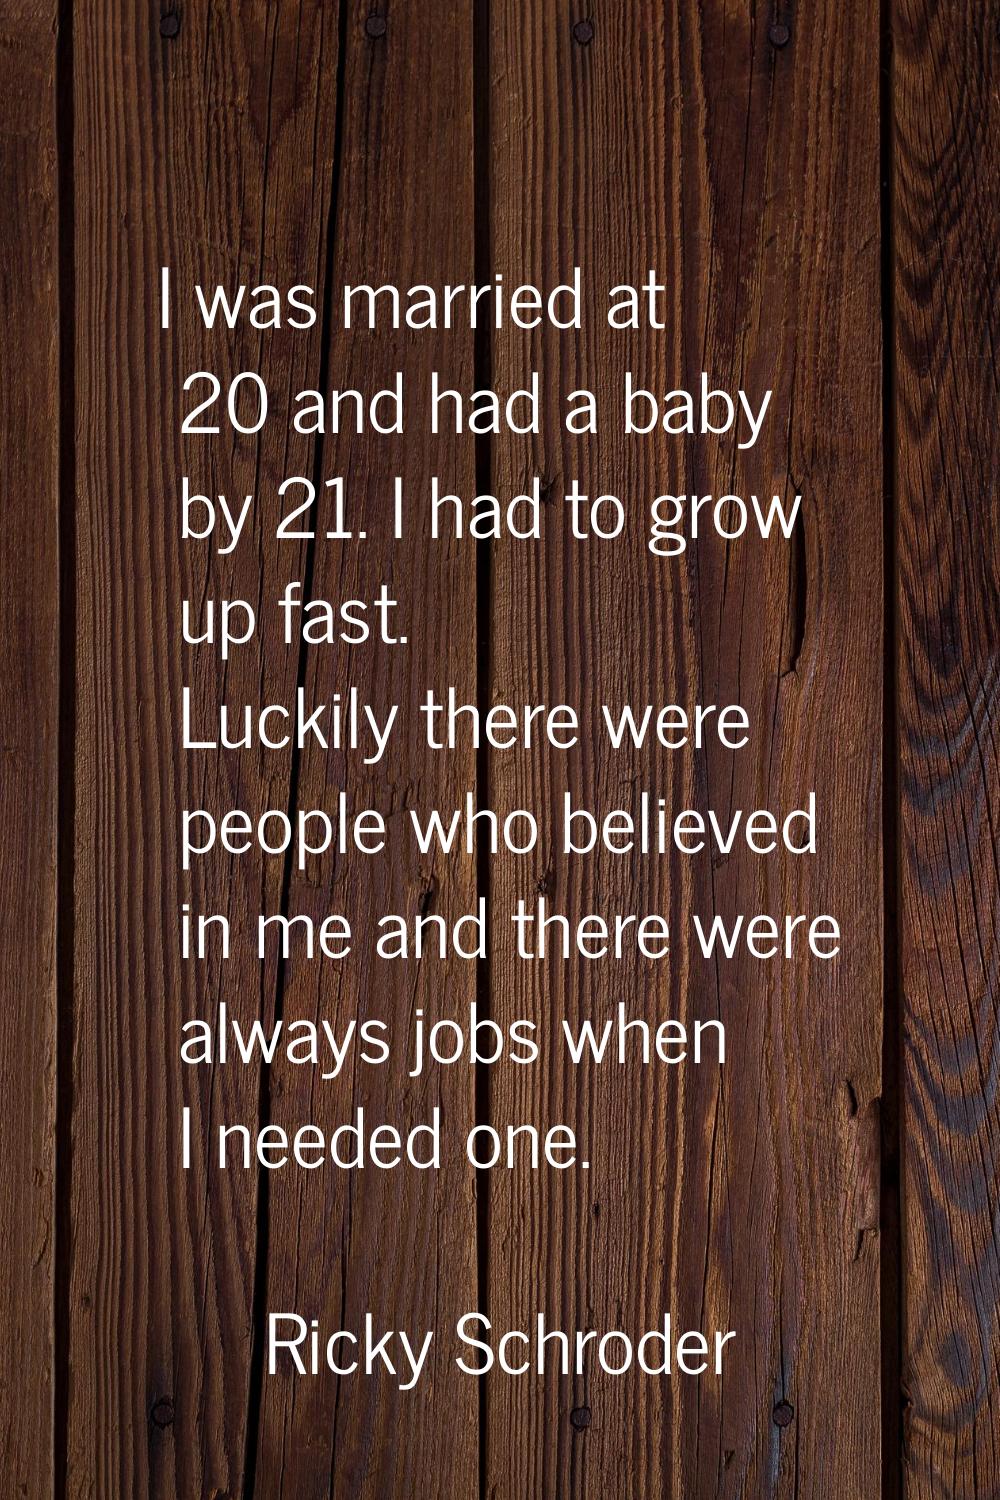 I was married at 20 and had a baby by 21. I had to grow up fast. Luckily there were people who beli